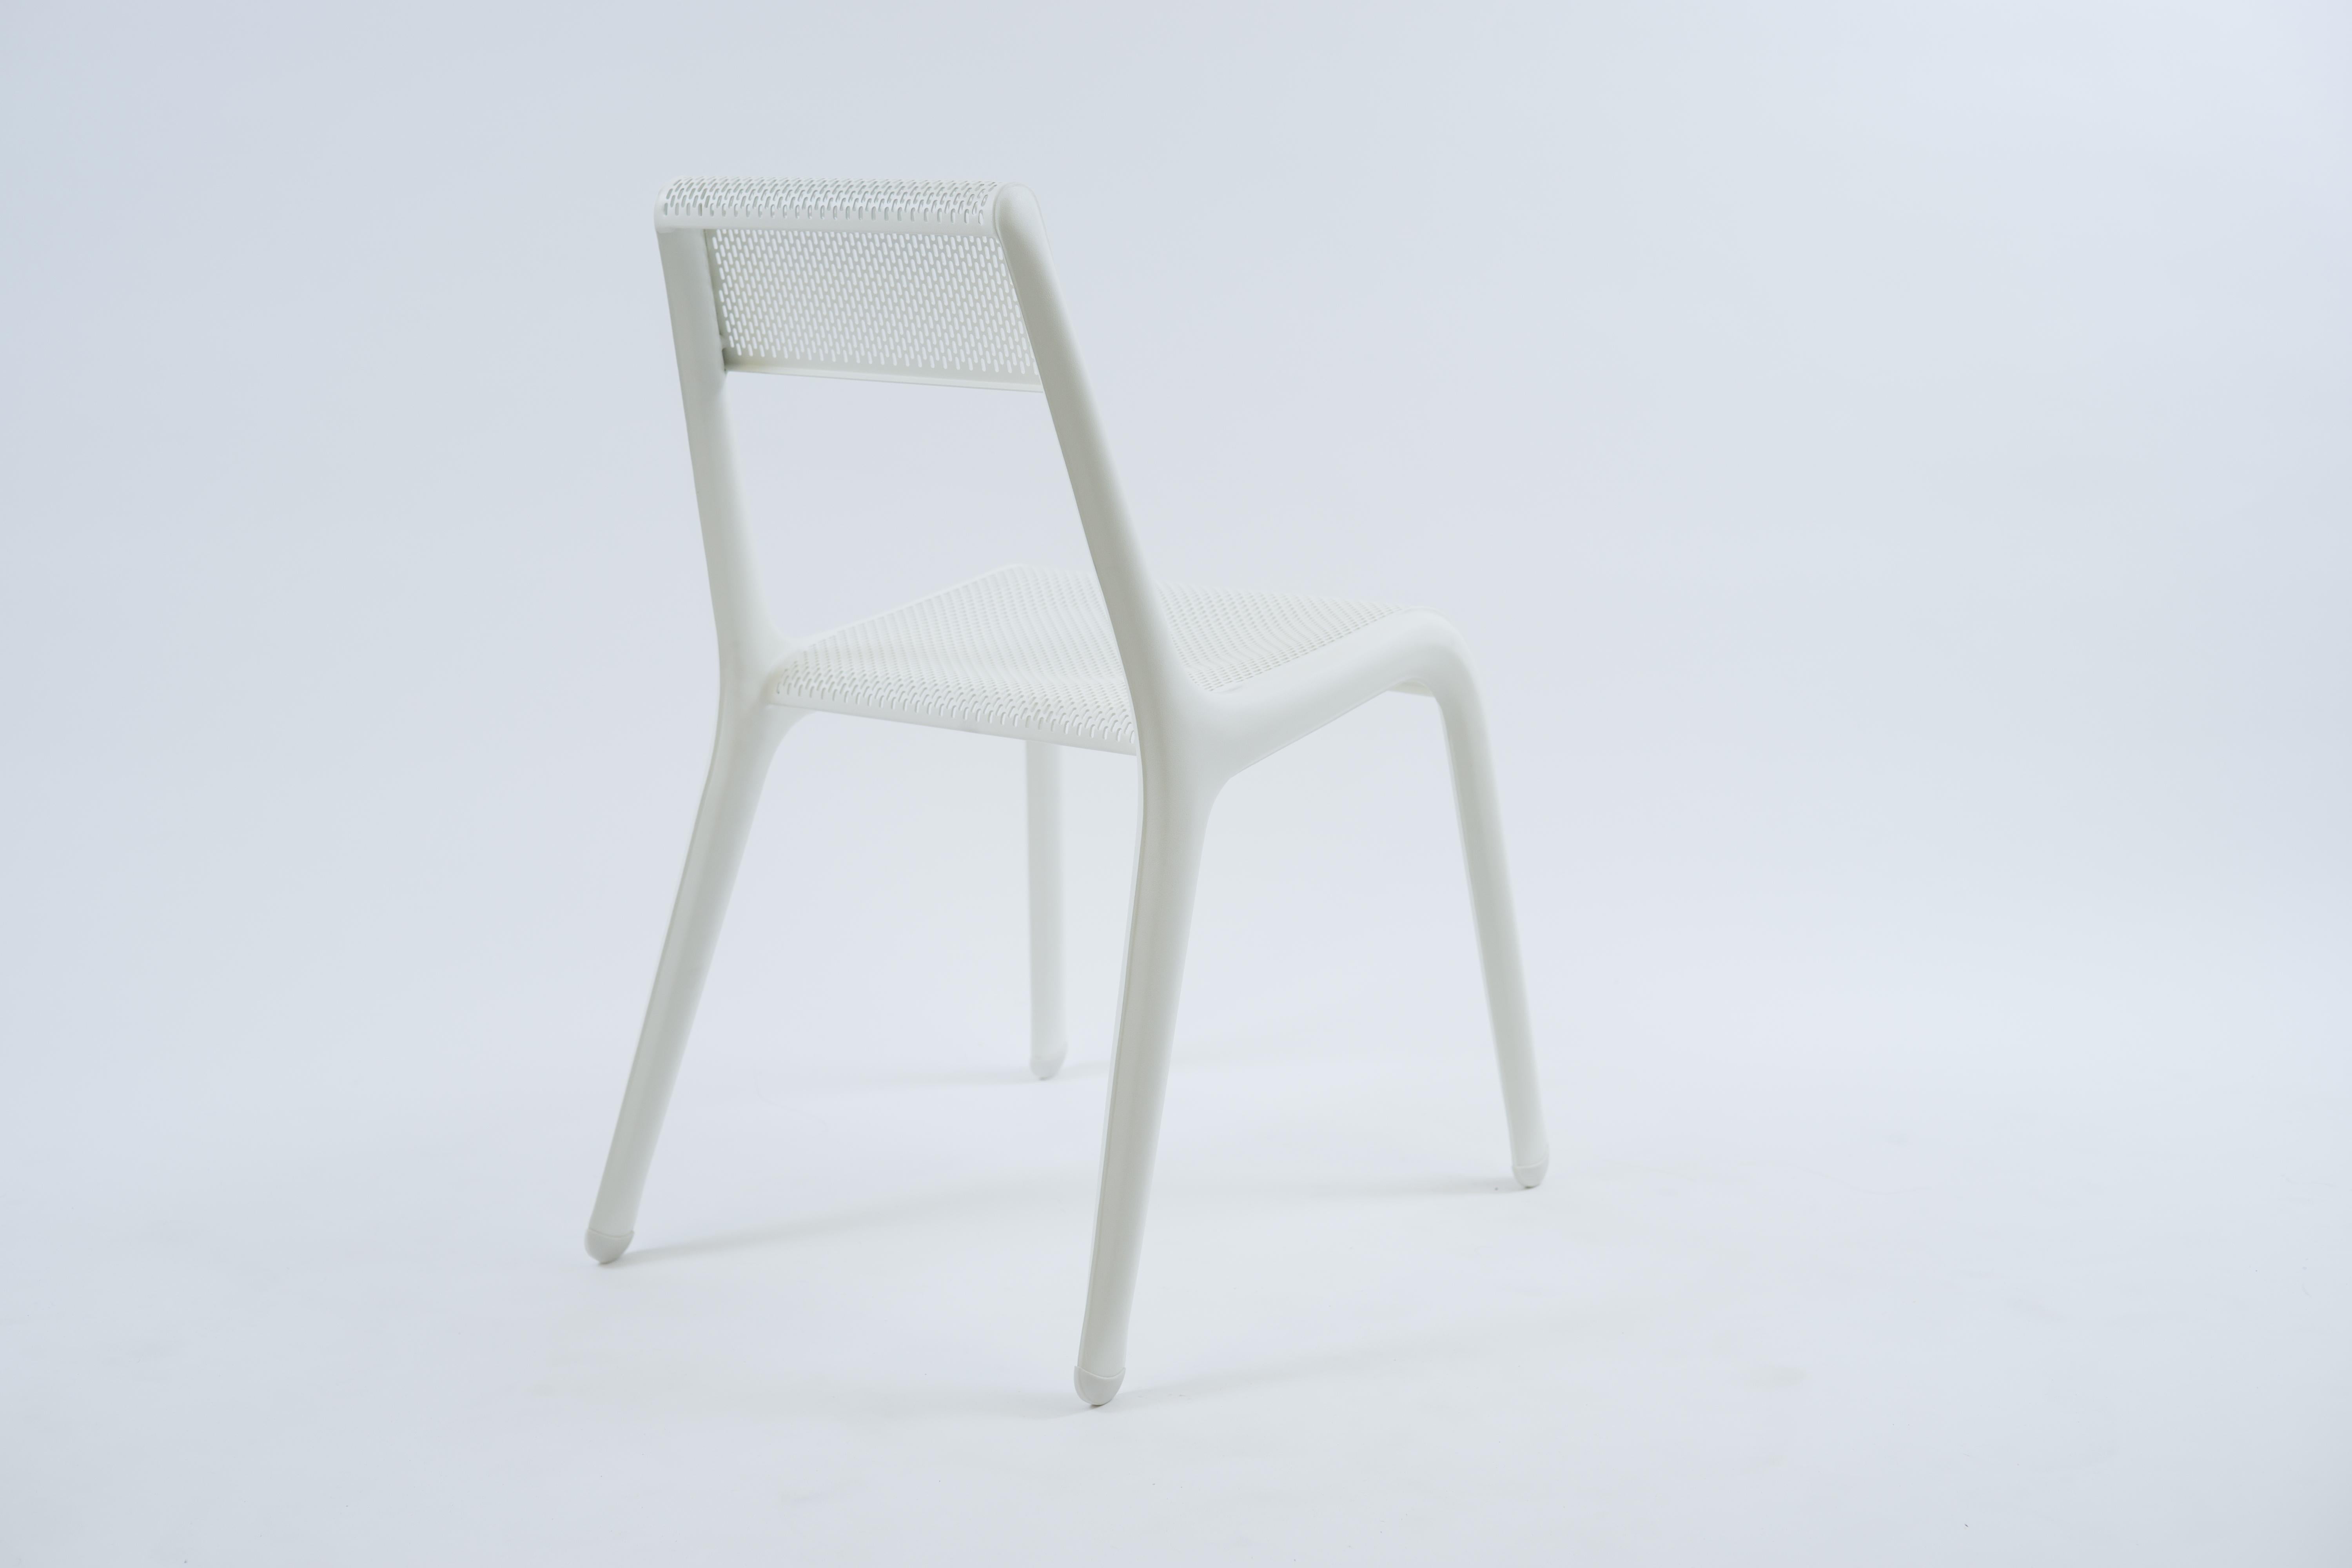 White Matt Leggera chair by Zieta
Dimensions: D 58 x W 49 x H 78 cm 
Material: Carbon Steel. 
Finish: Powder-Coated. Matt finish. 
Available in other colors. Also available in Ultraleggera version. 


LEGGERA chair is a steel seating with clean